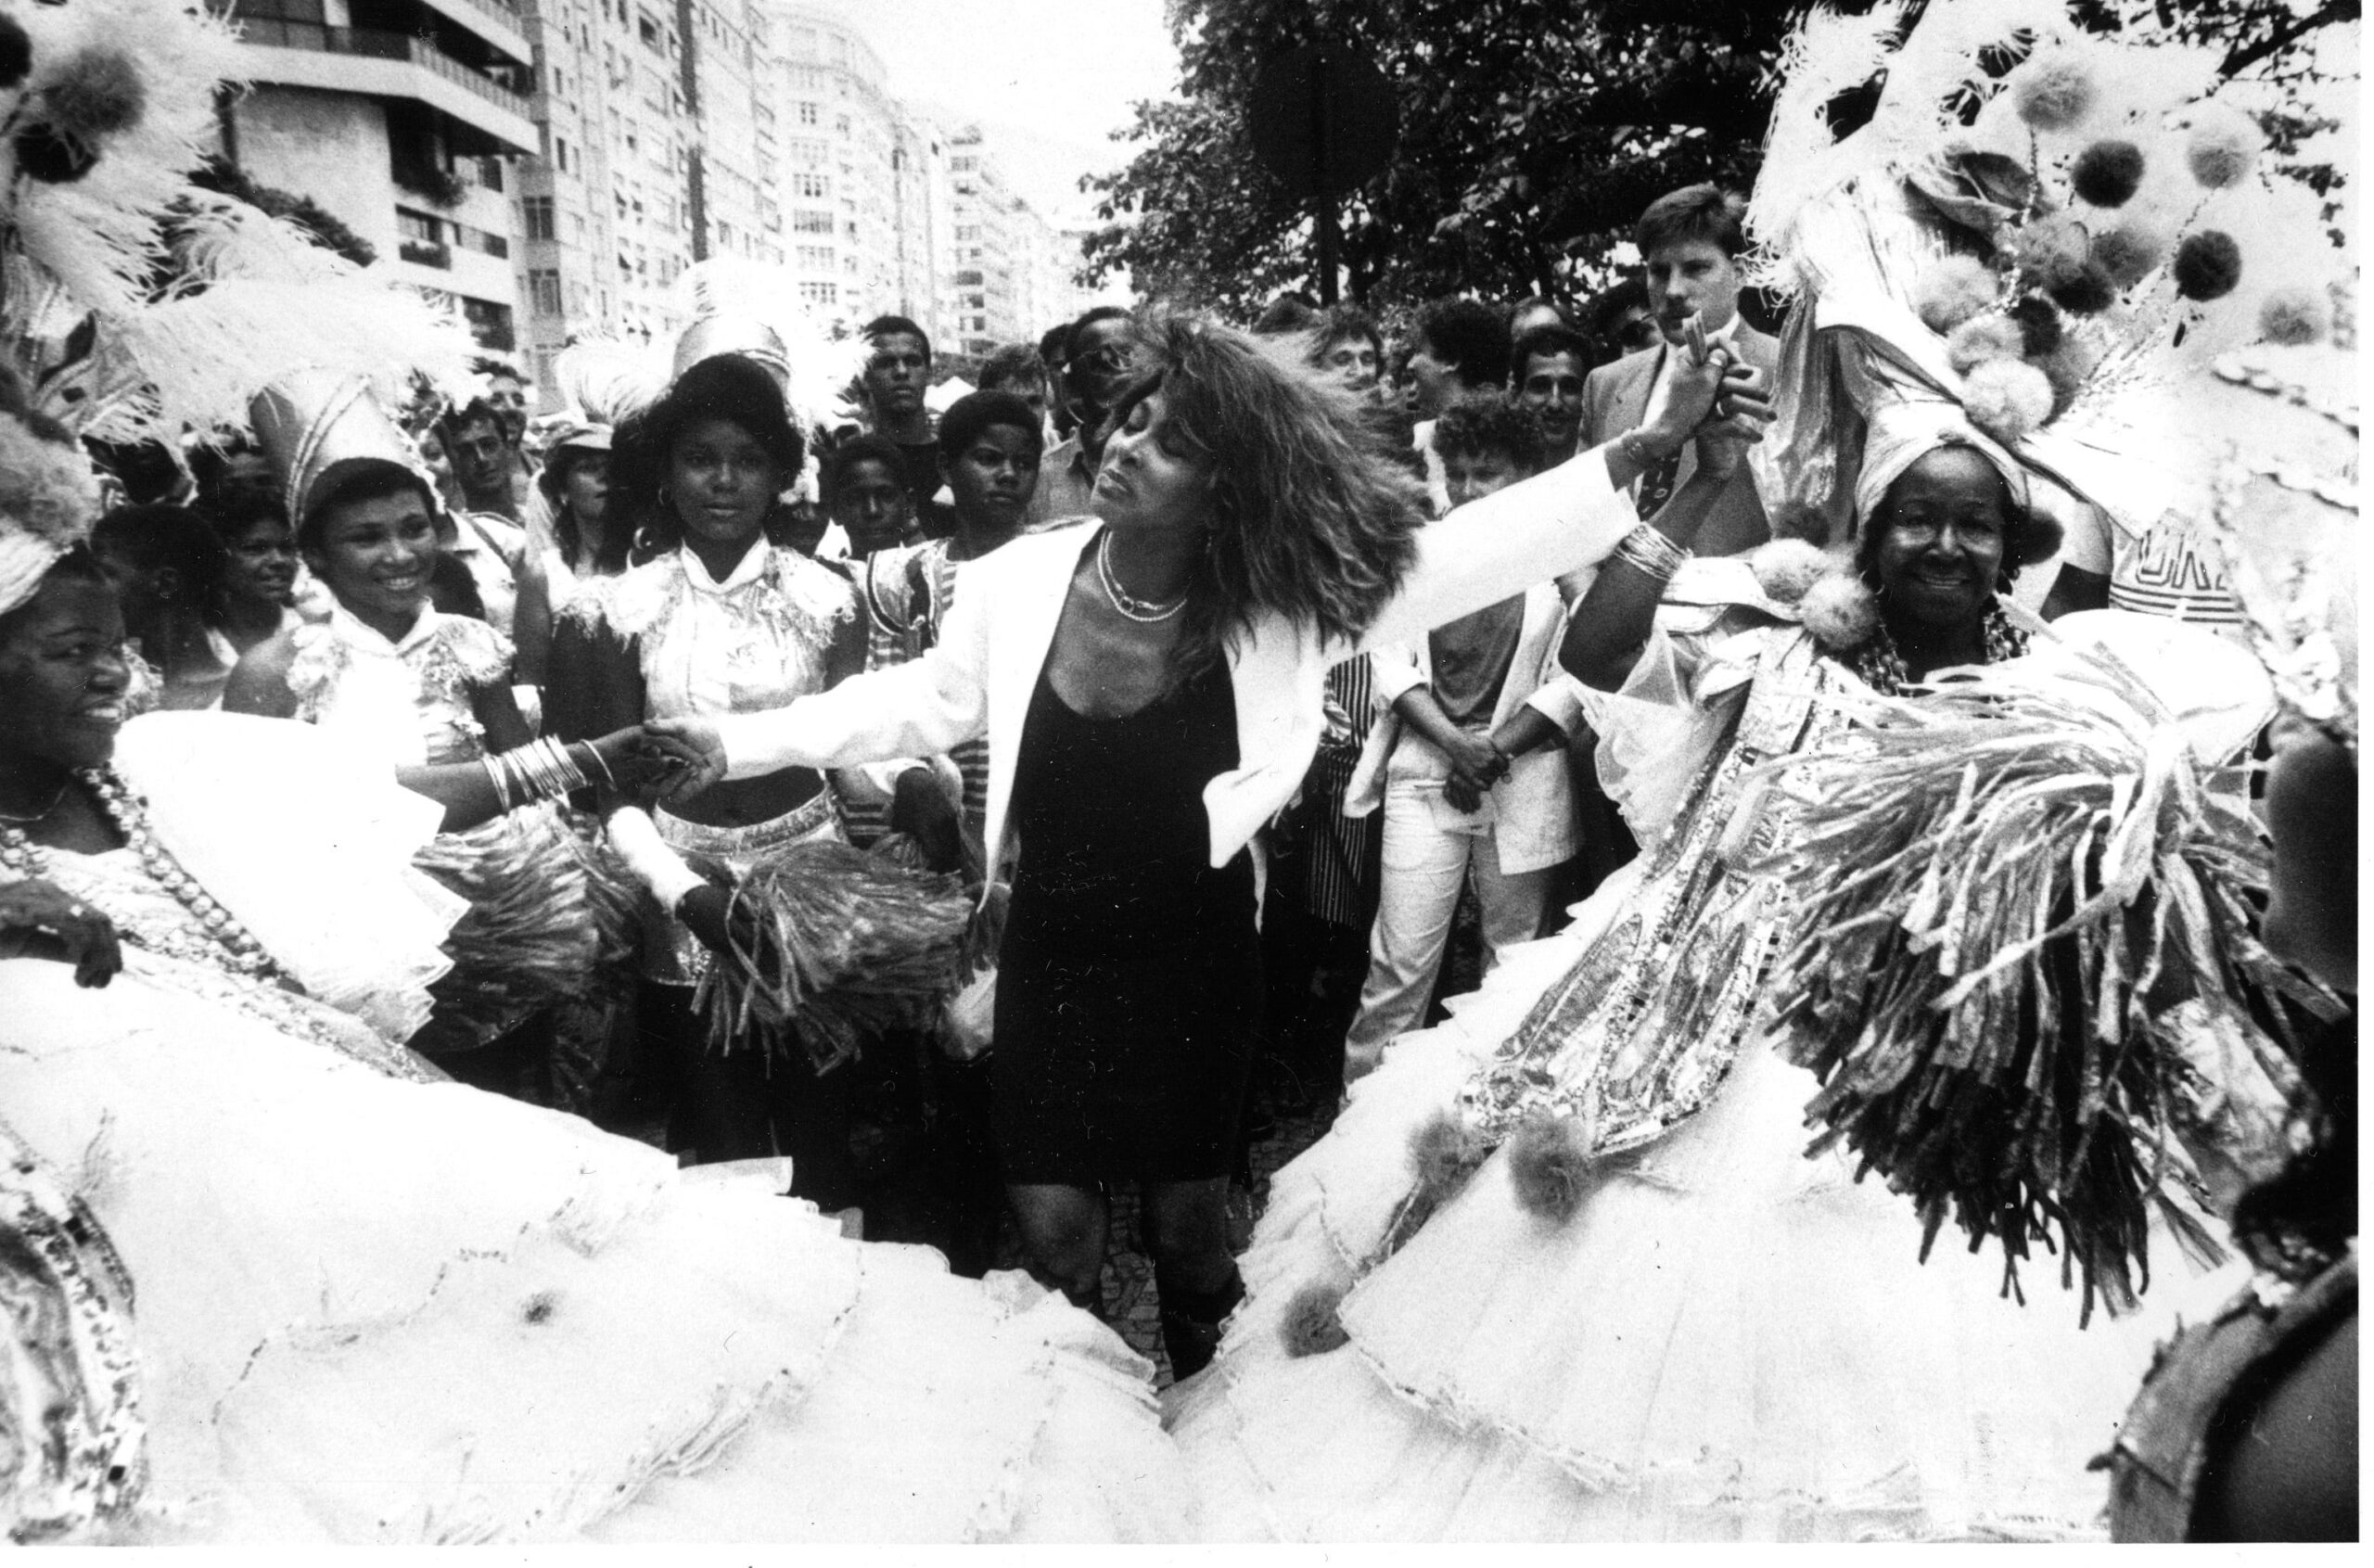 Singer Tina Turner dances the samba with traditional carnival dancers in the streets of Rio de Janeiro, Brazil, December 30, 1987.